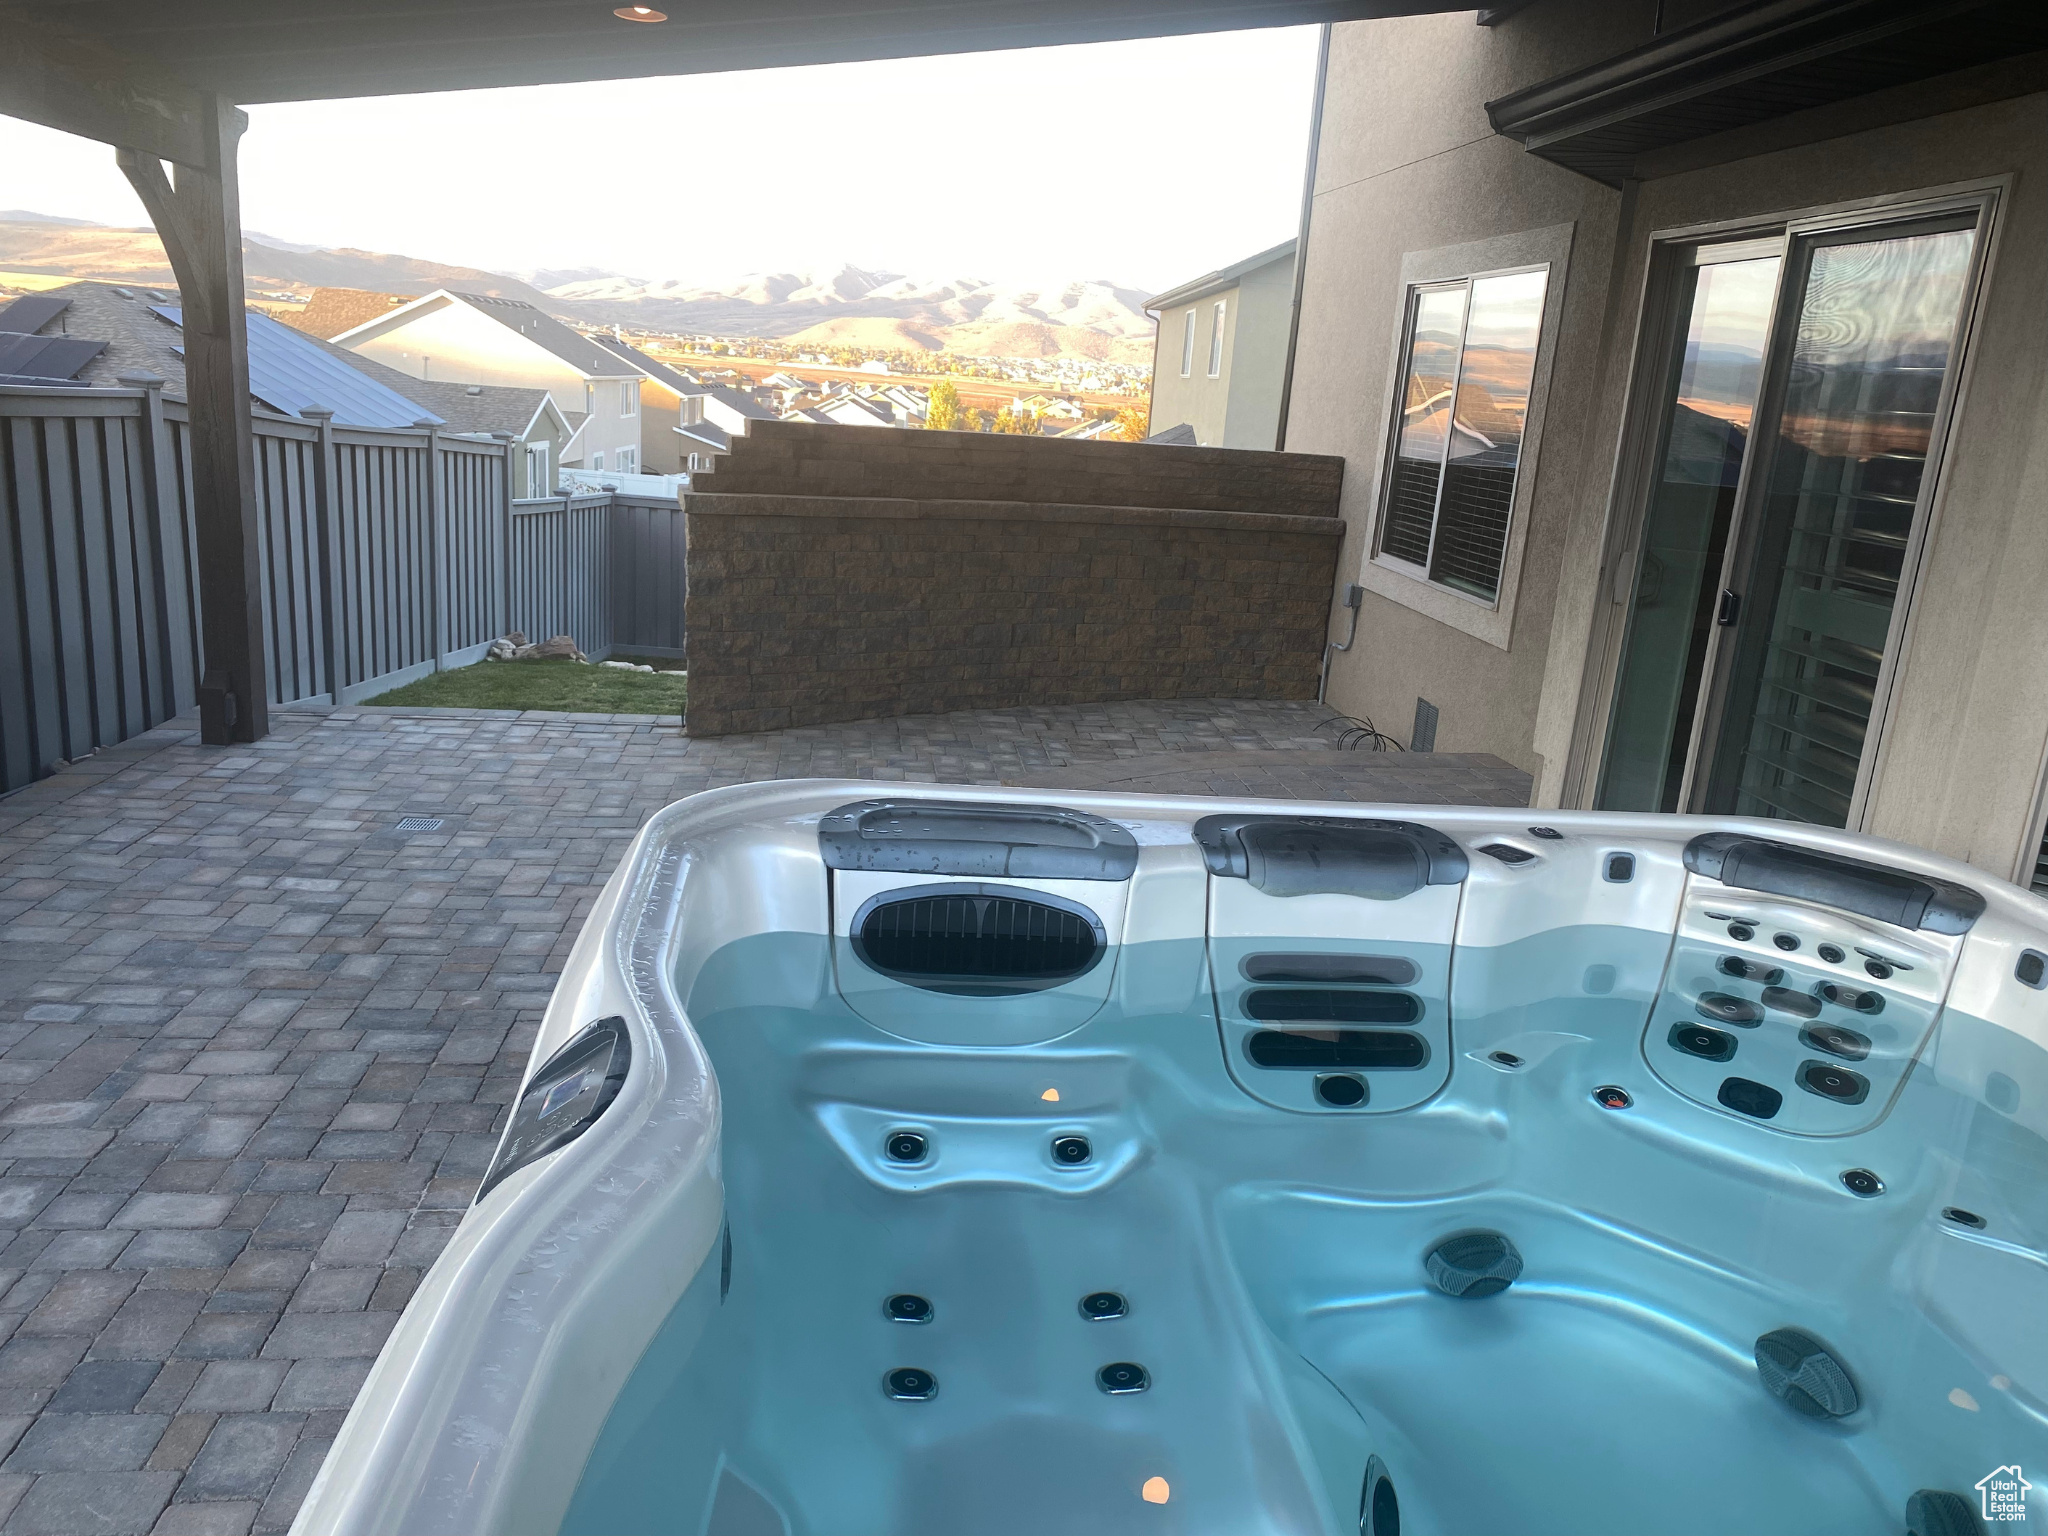 View of working hot tub on stone patio